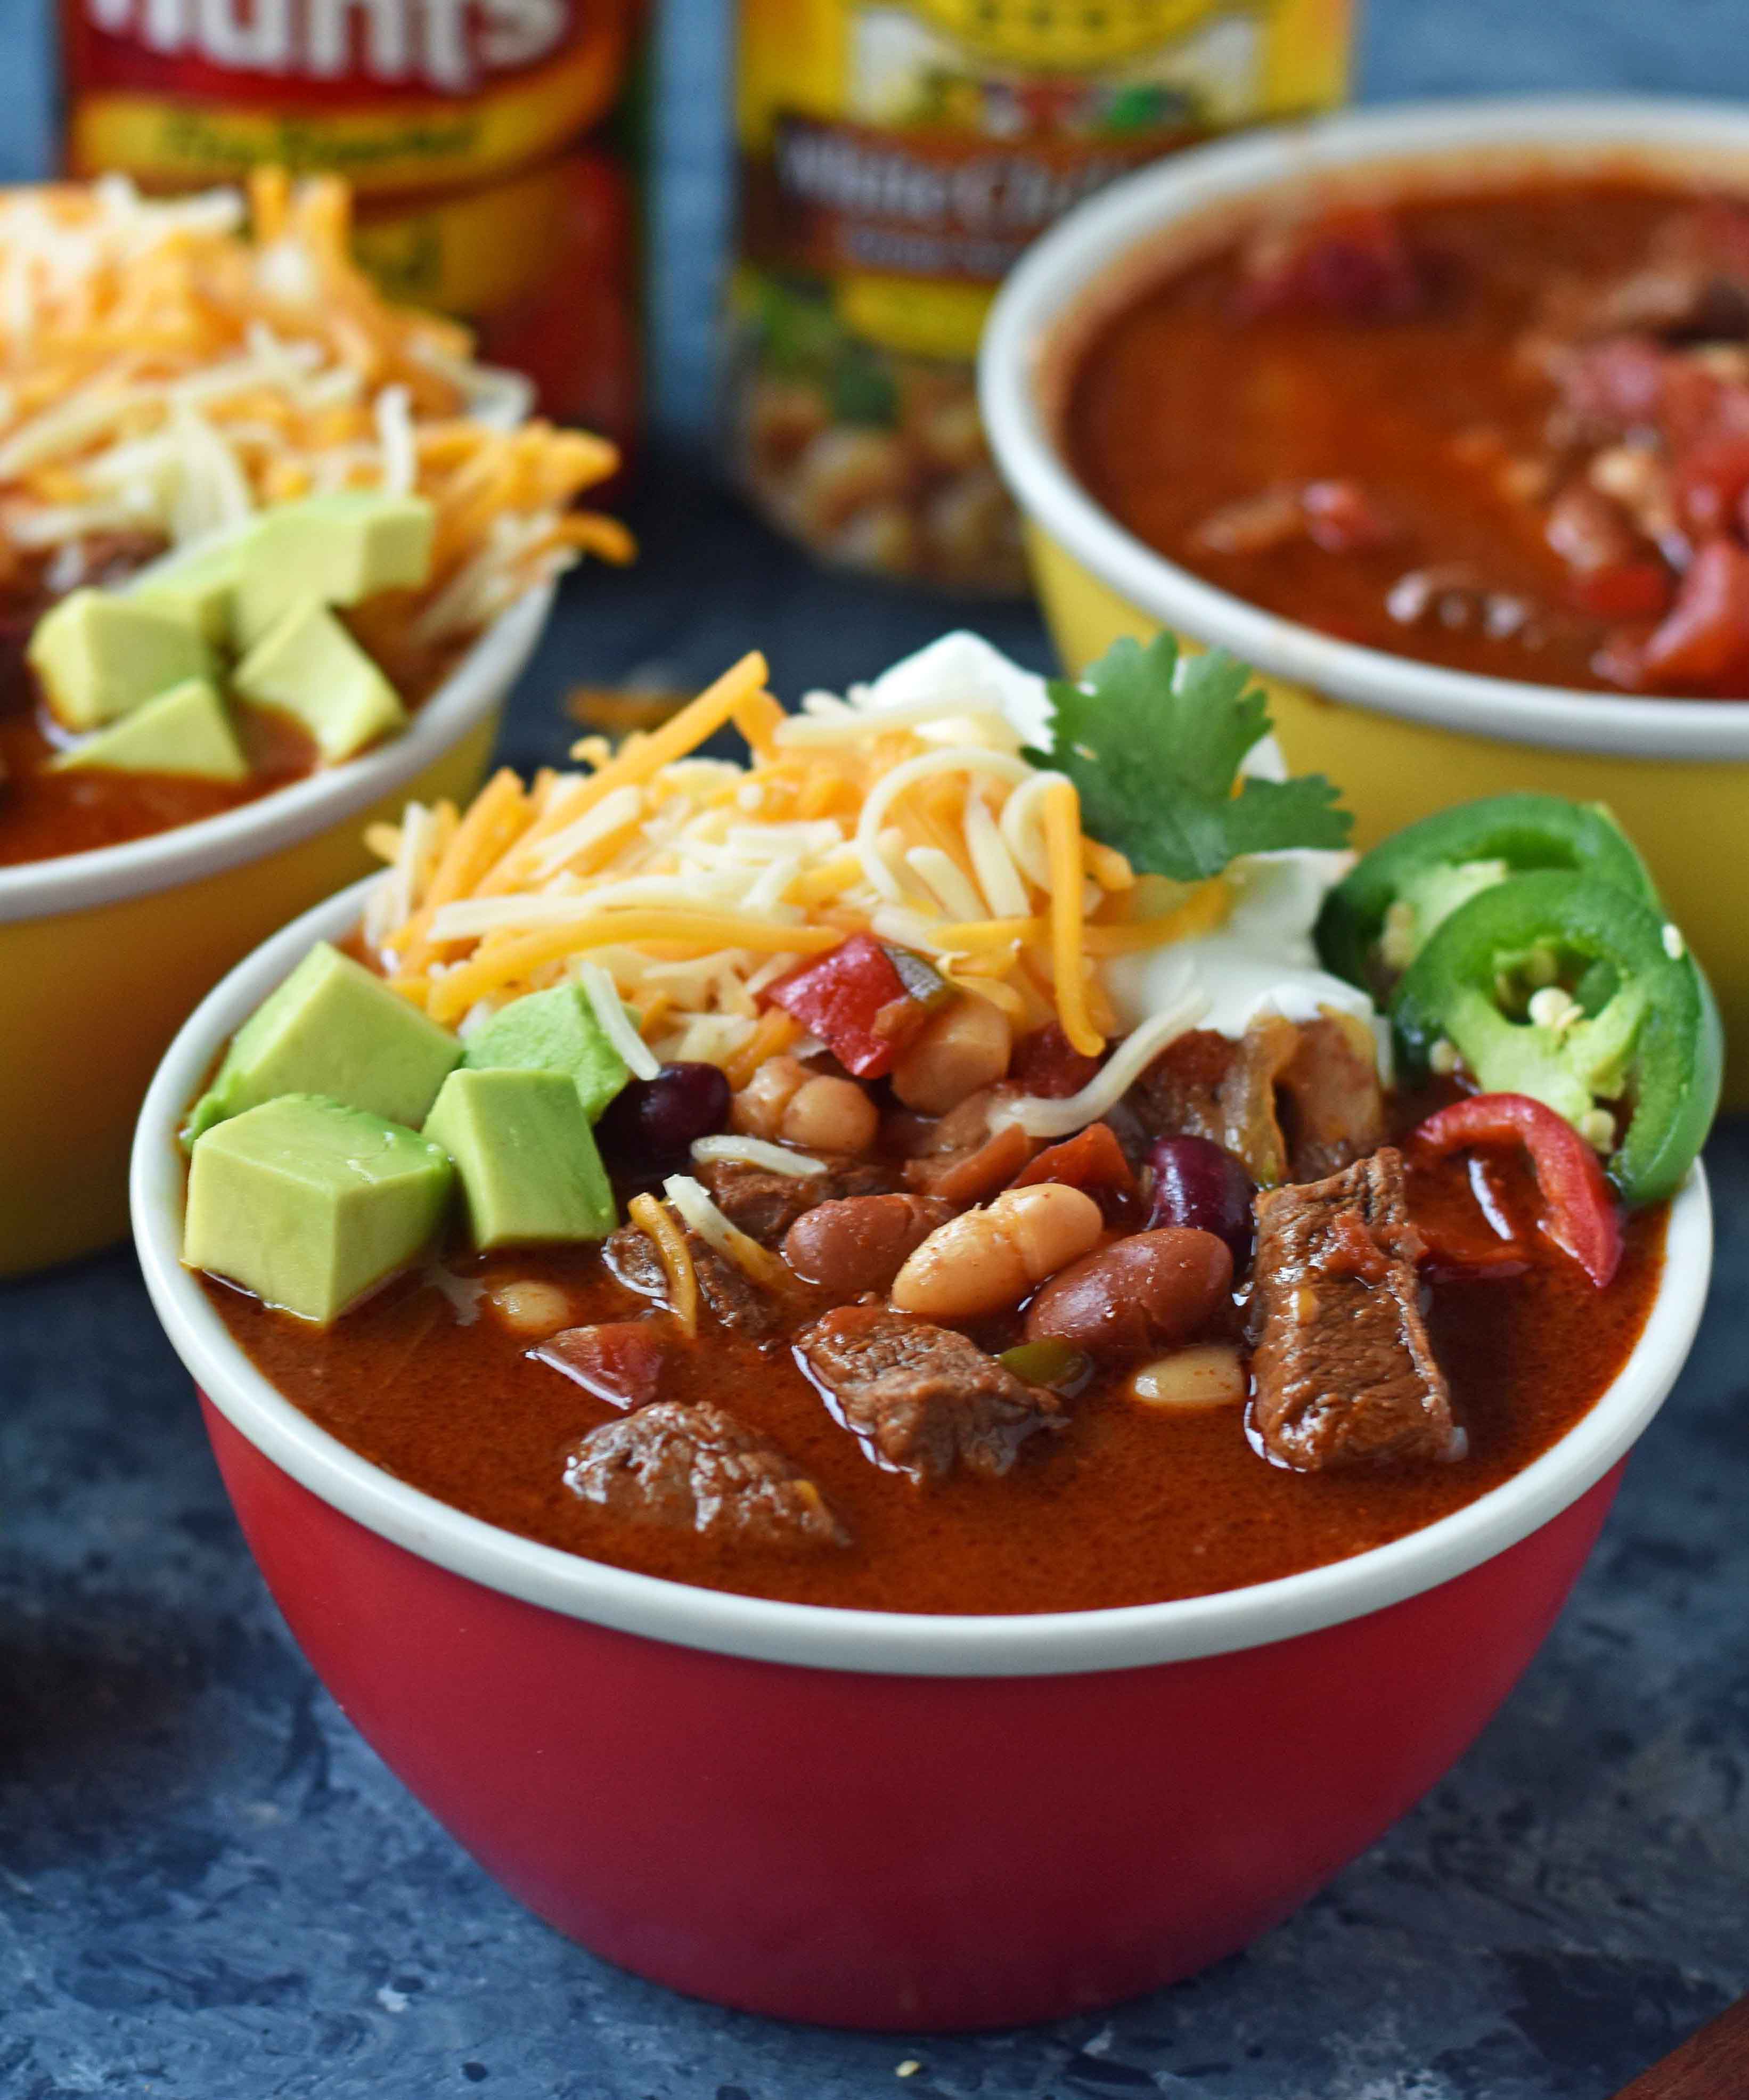 MJ's Award-Winning Chili is made with tender beef chuck roast simmered to perfection, onions, peppers, chili beans, fire-roasted tomatoes, and mexican spices. A perfect prize-winning chili recipe. www.modernhoney.com